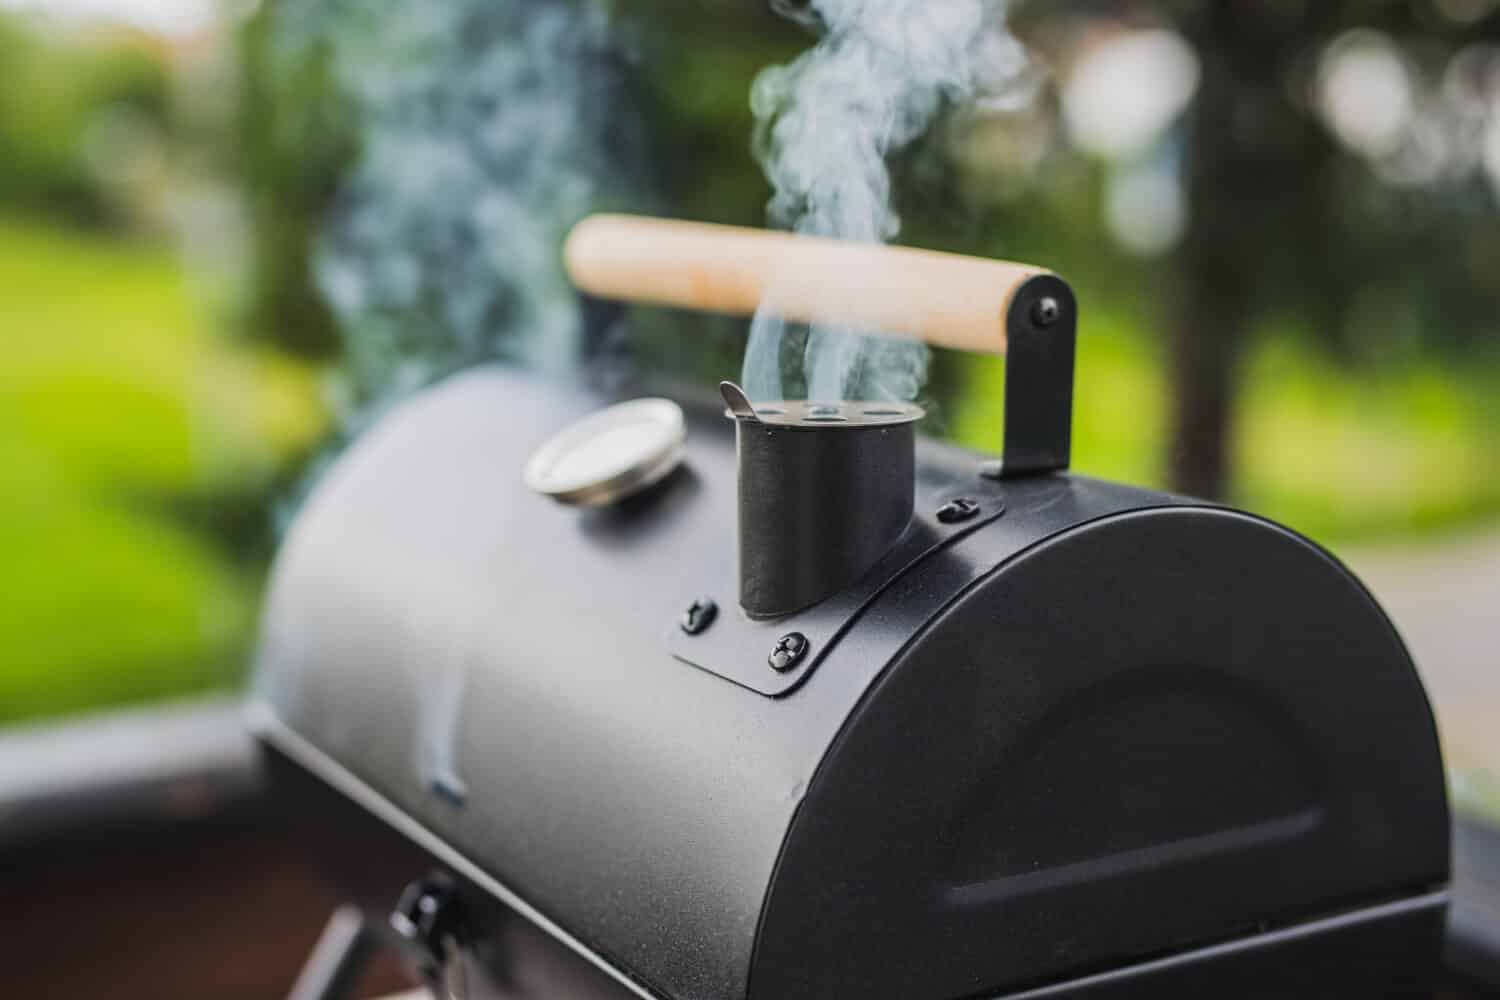 Smoke coming out of a smokestack of a small black smoker grill or barbecue on green background.